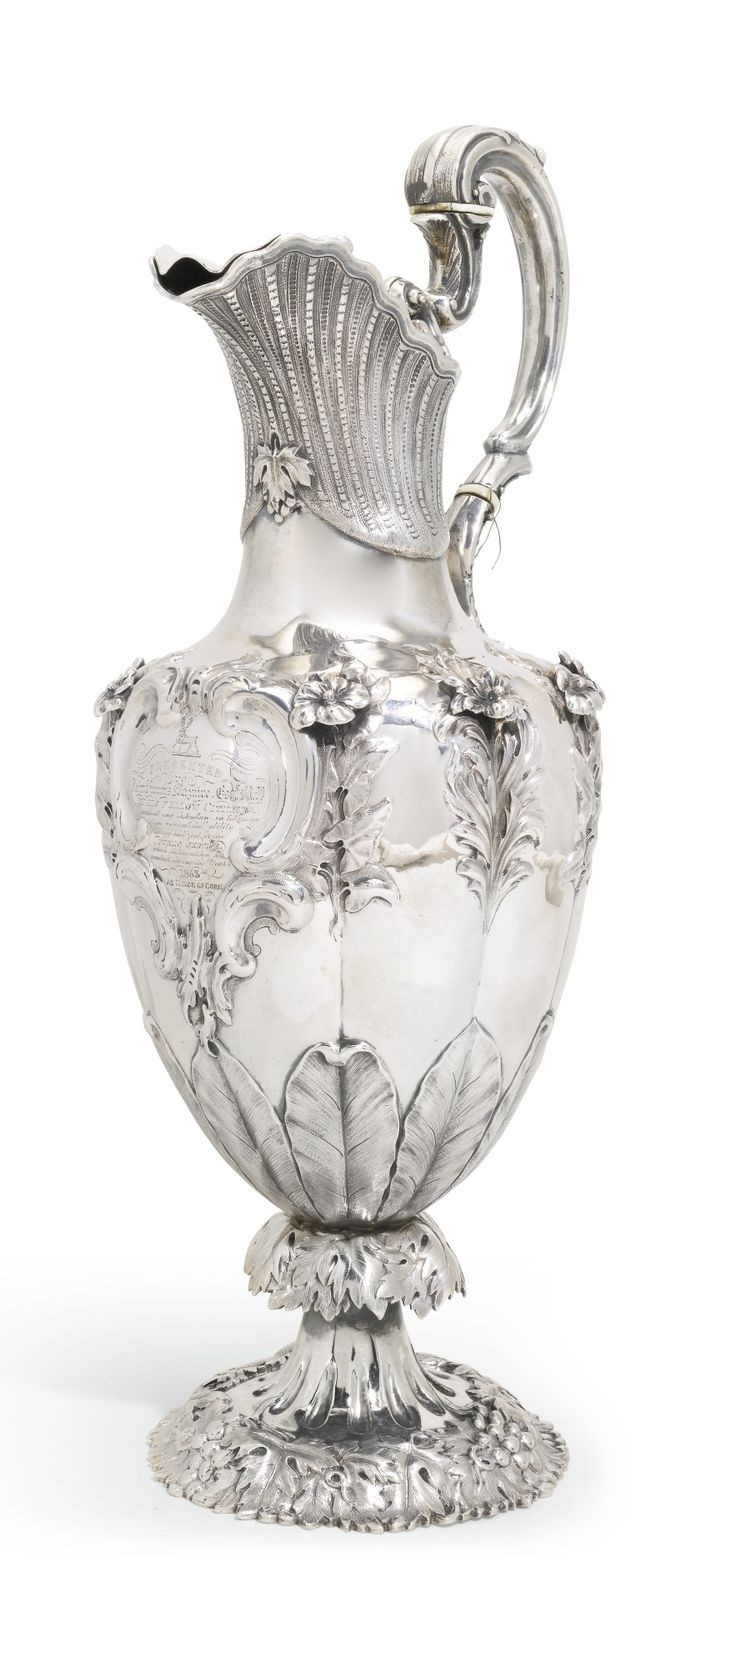 Antique Silver Vases for Sale Of 865 Best Silver Images On Pinterest Antique Silver Vintage Silver Intended for A Victorian Silver Presentation Ewer Robert W Smith Dublin 1843 the